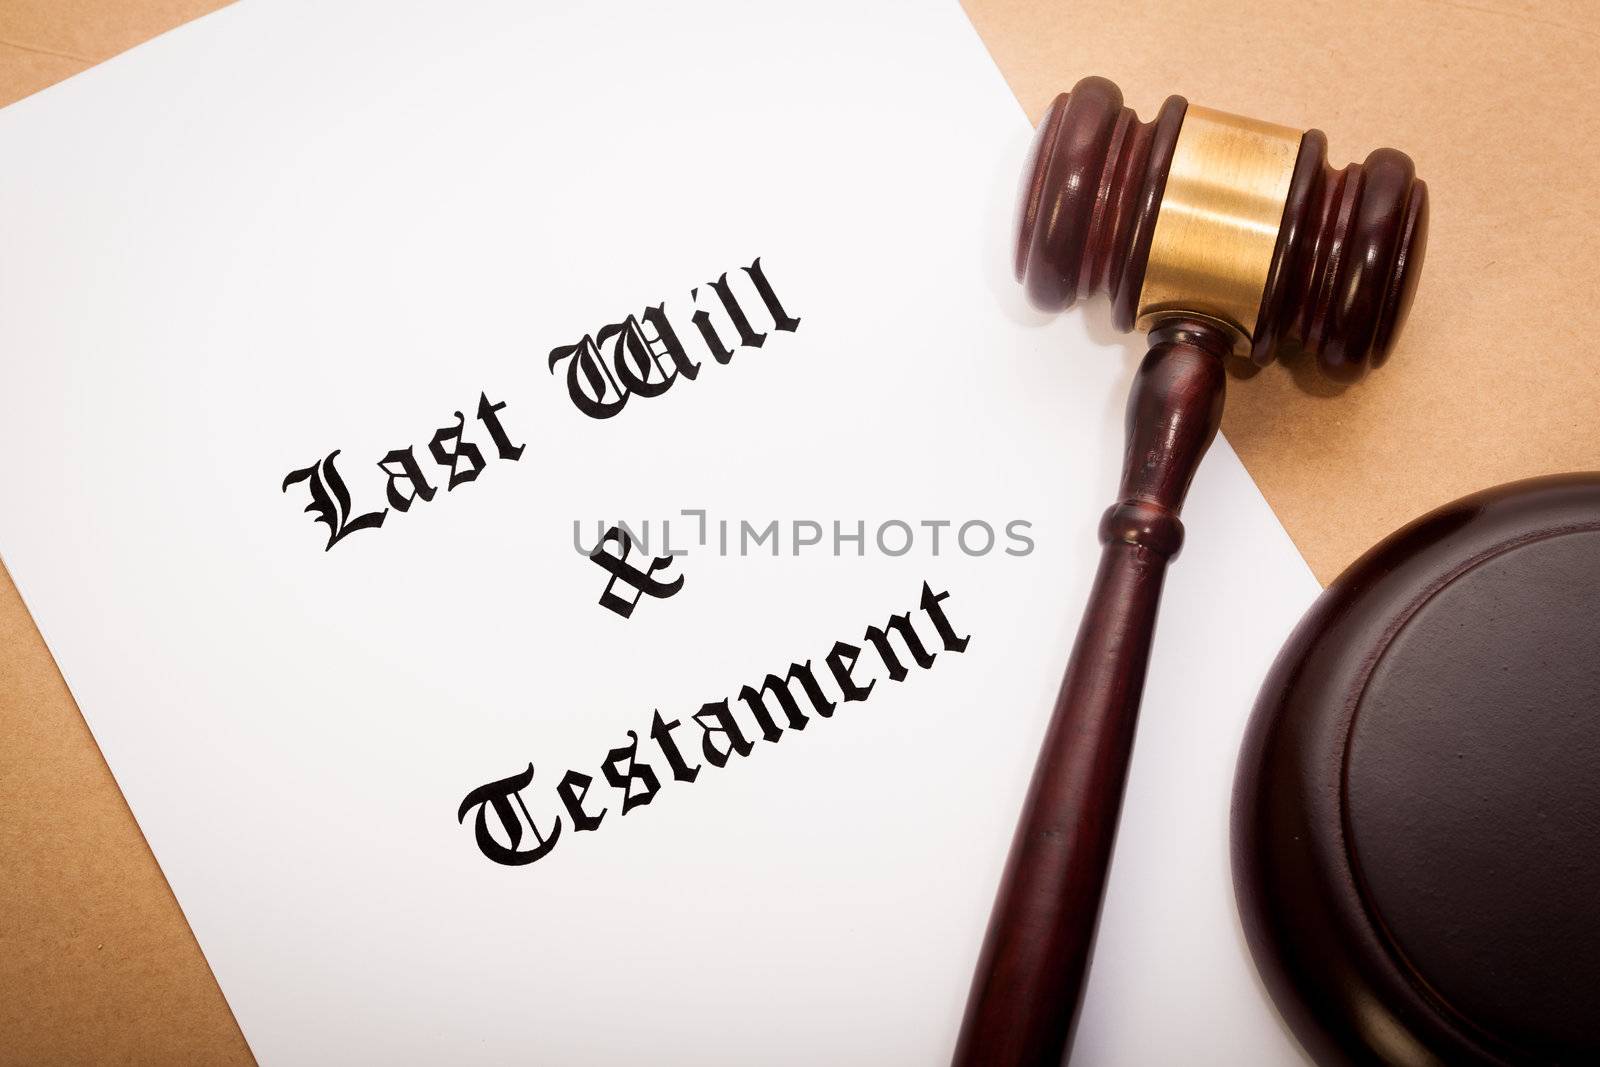 A gavel and soundboard on top of a "Last Will and Testament" contract, with a antique-like background.